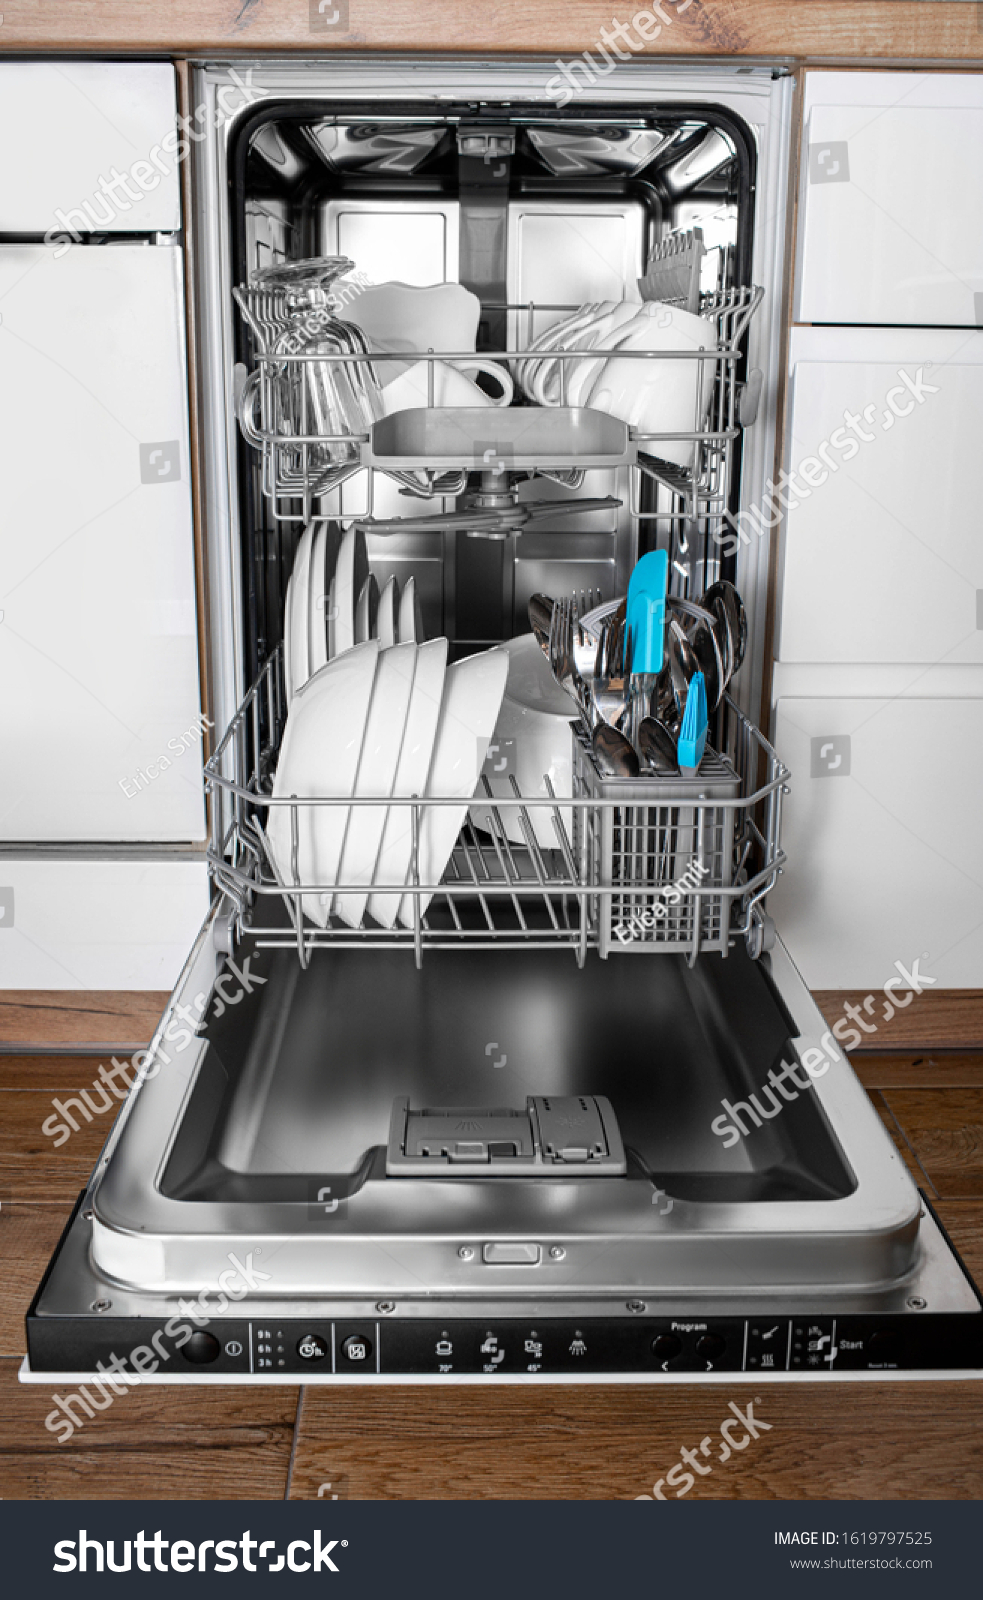 stock photo built in dishwasher in a modern kitchen with clean dishes after washing front view 1619797525